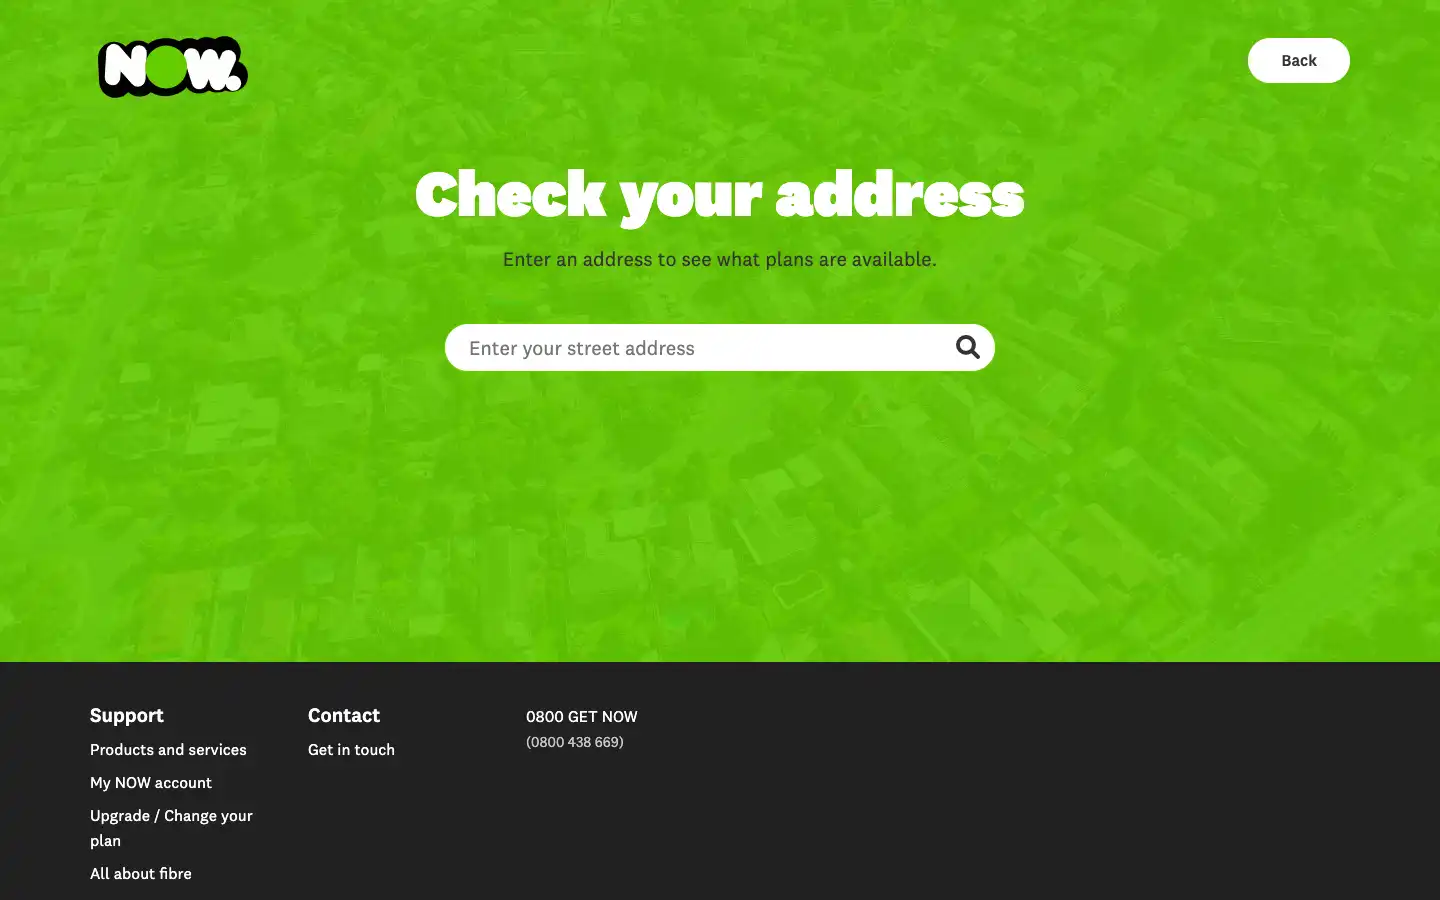 The Check your address tool from the site